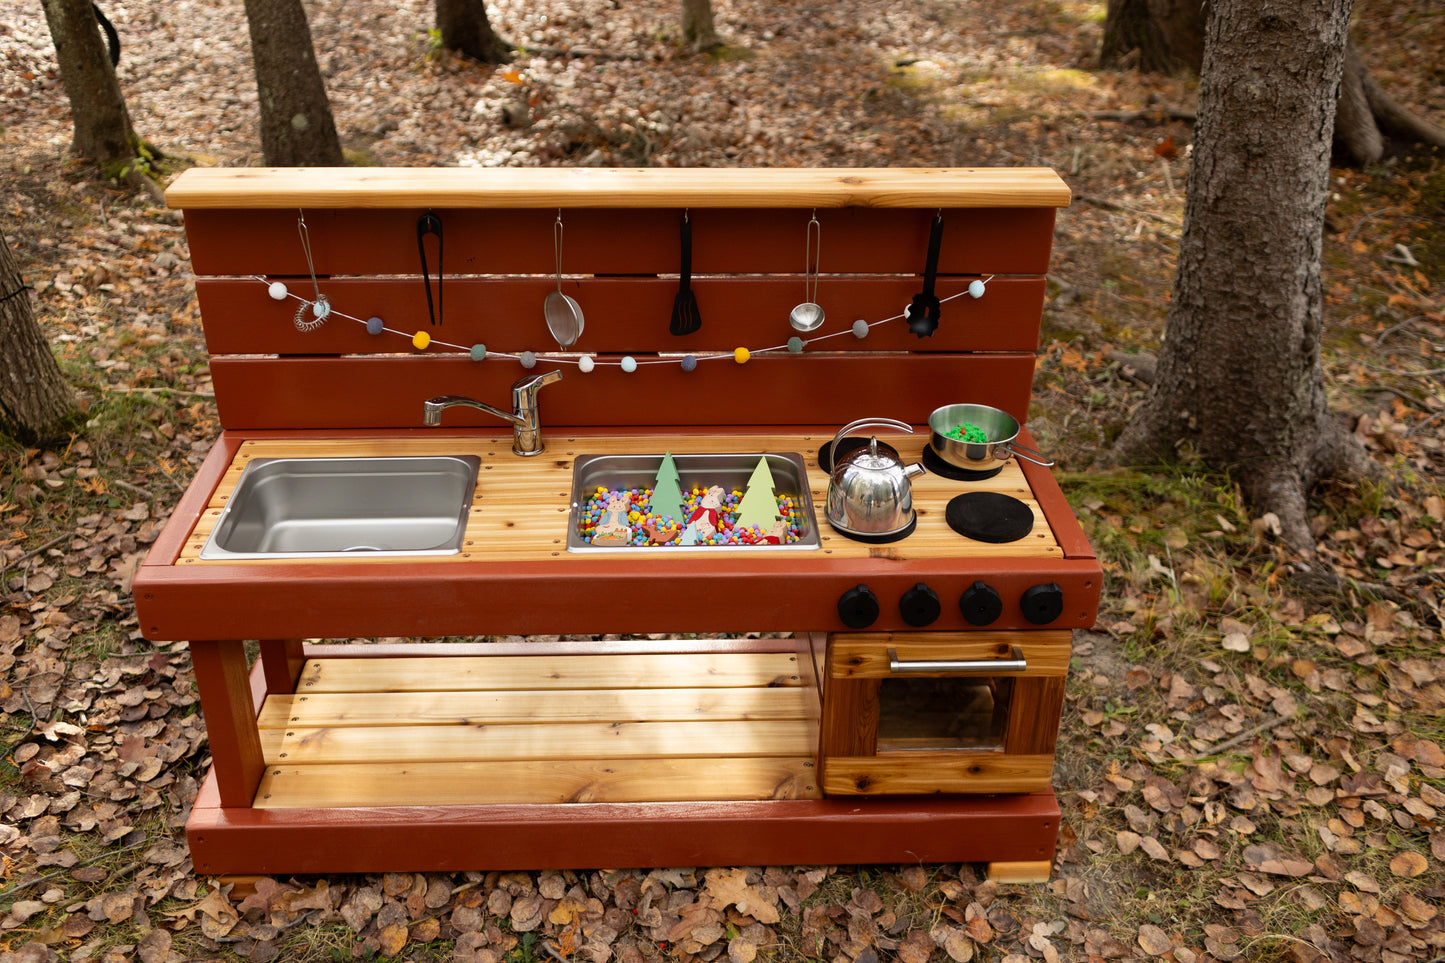 Painted Mud Kitchen with Oven and Working Sink